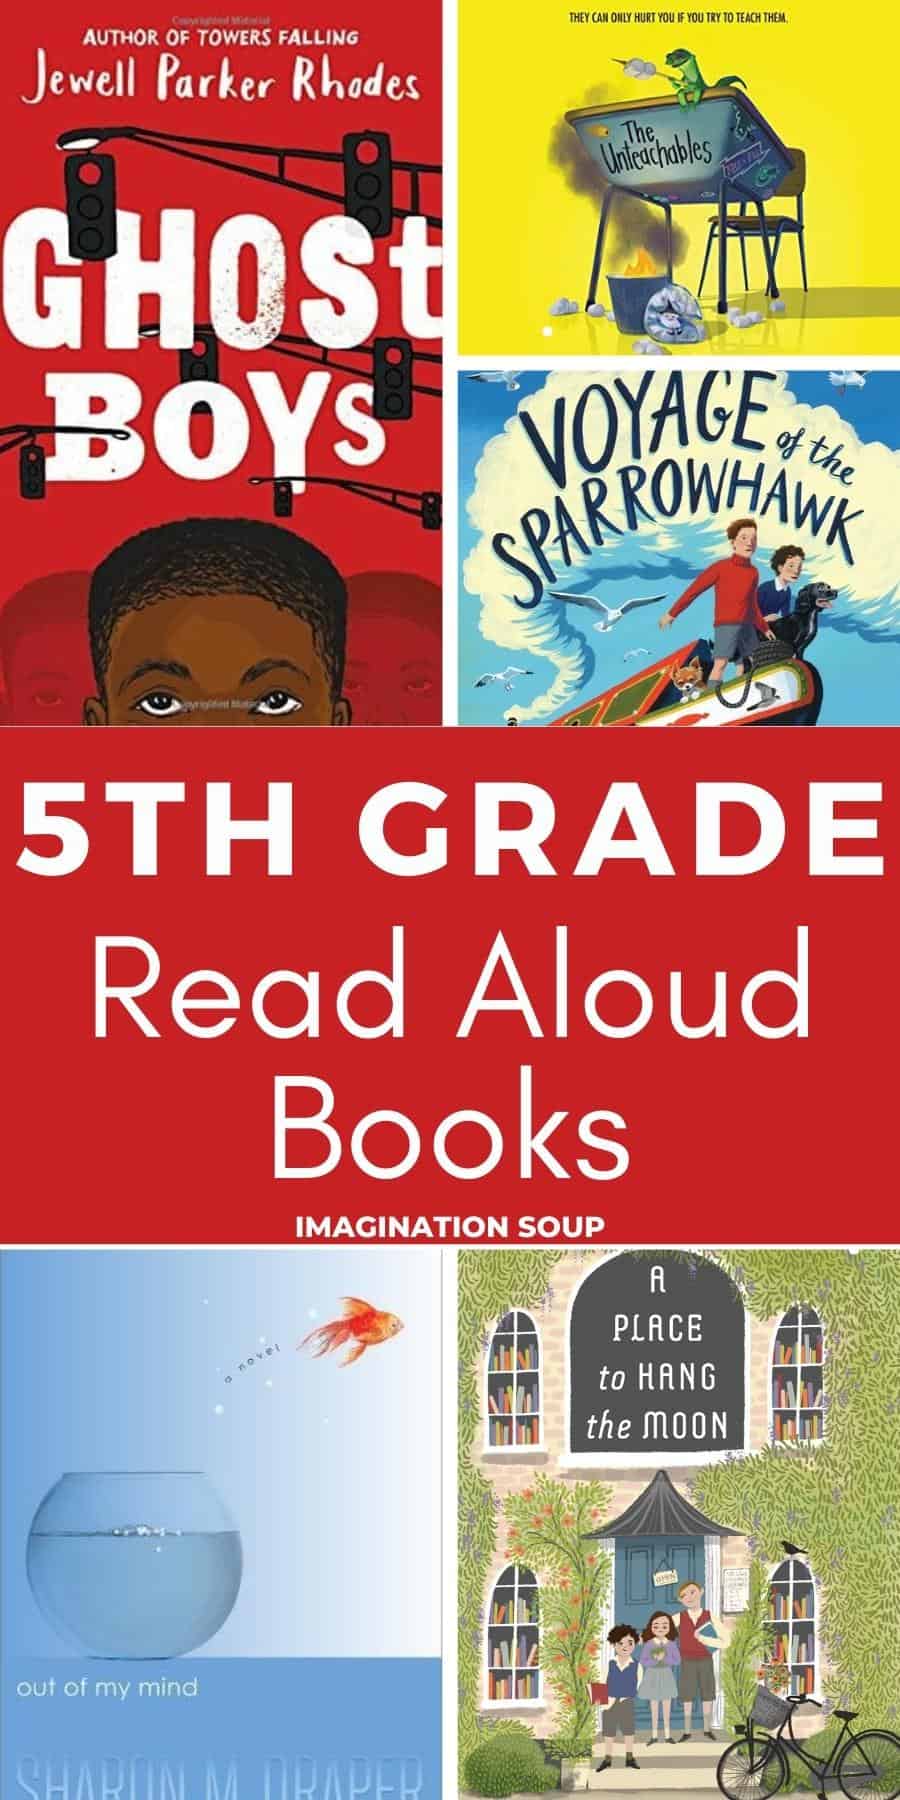 The best read aloud books for 5th grade